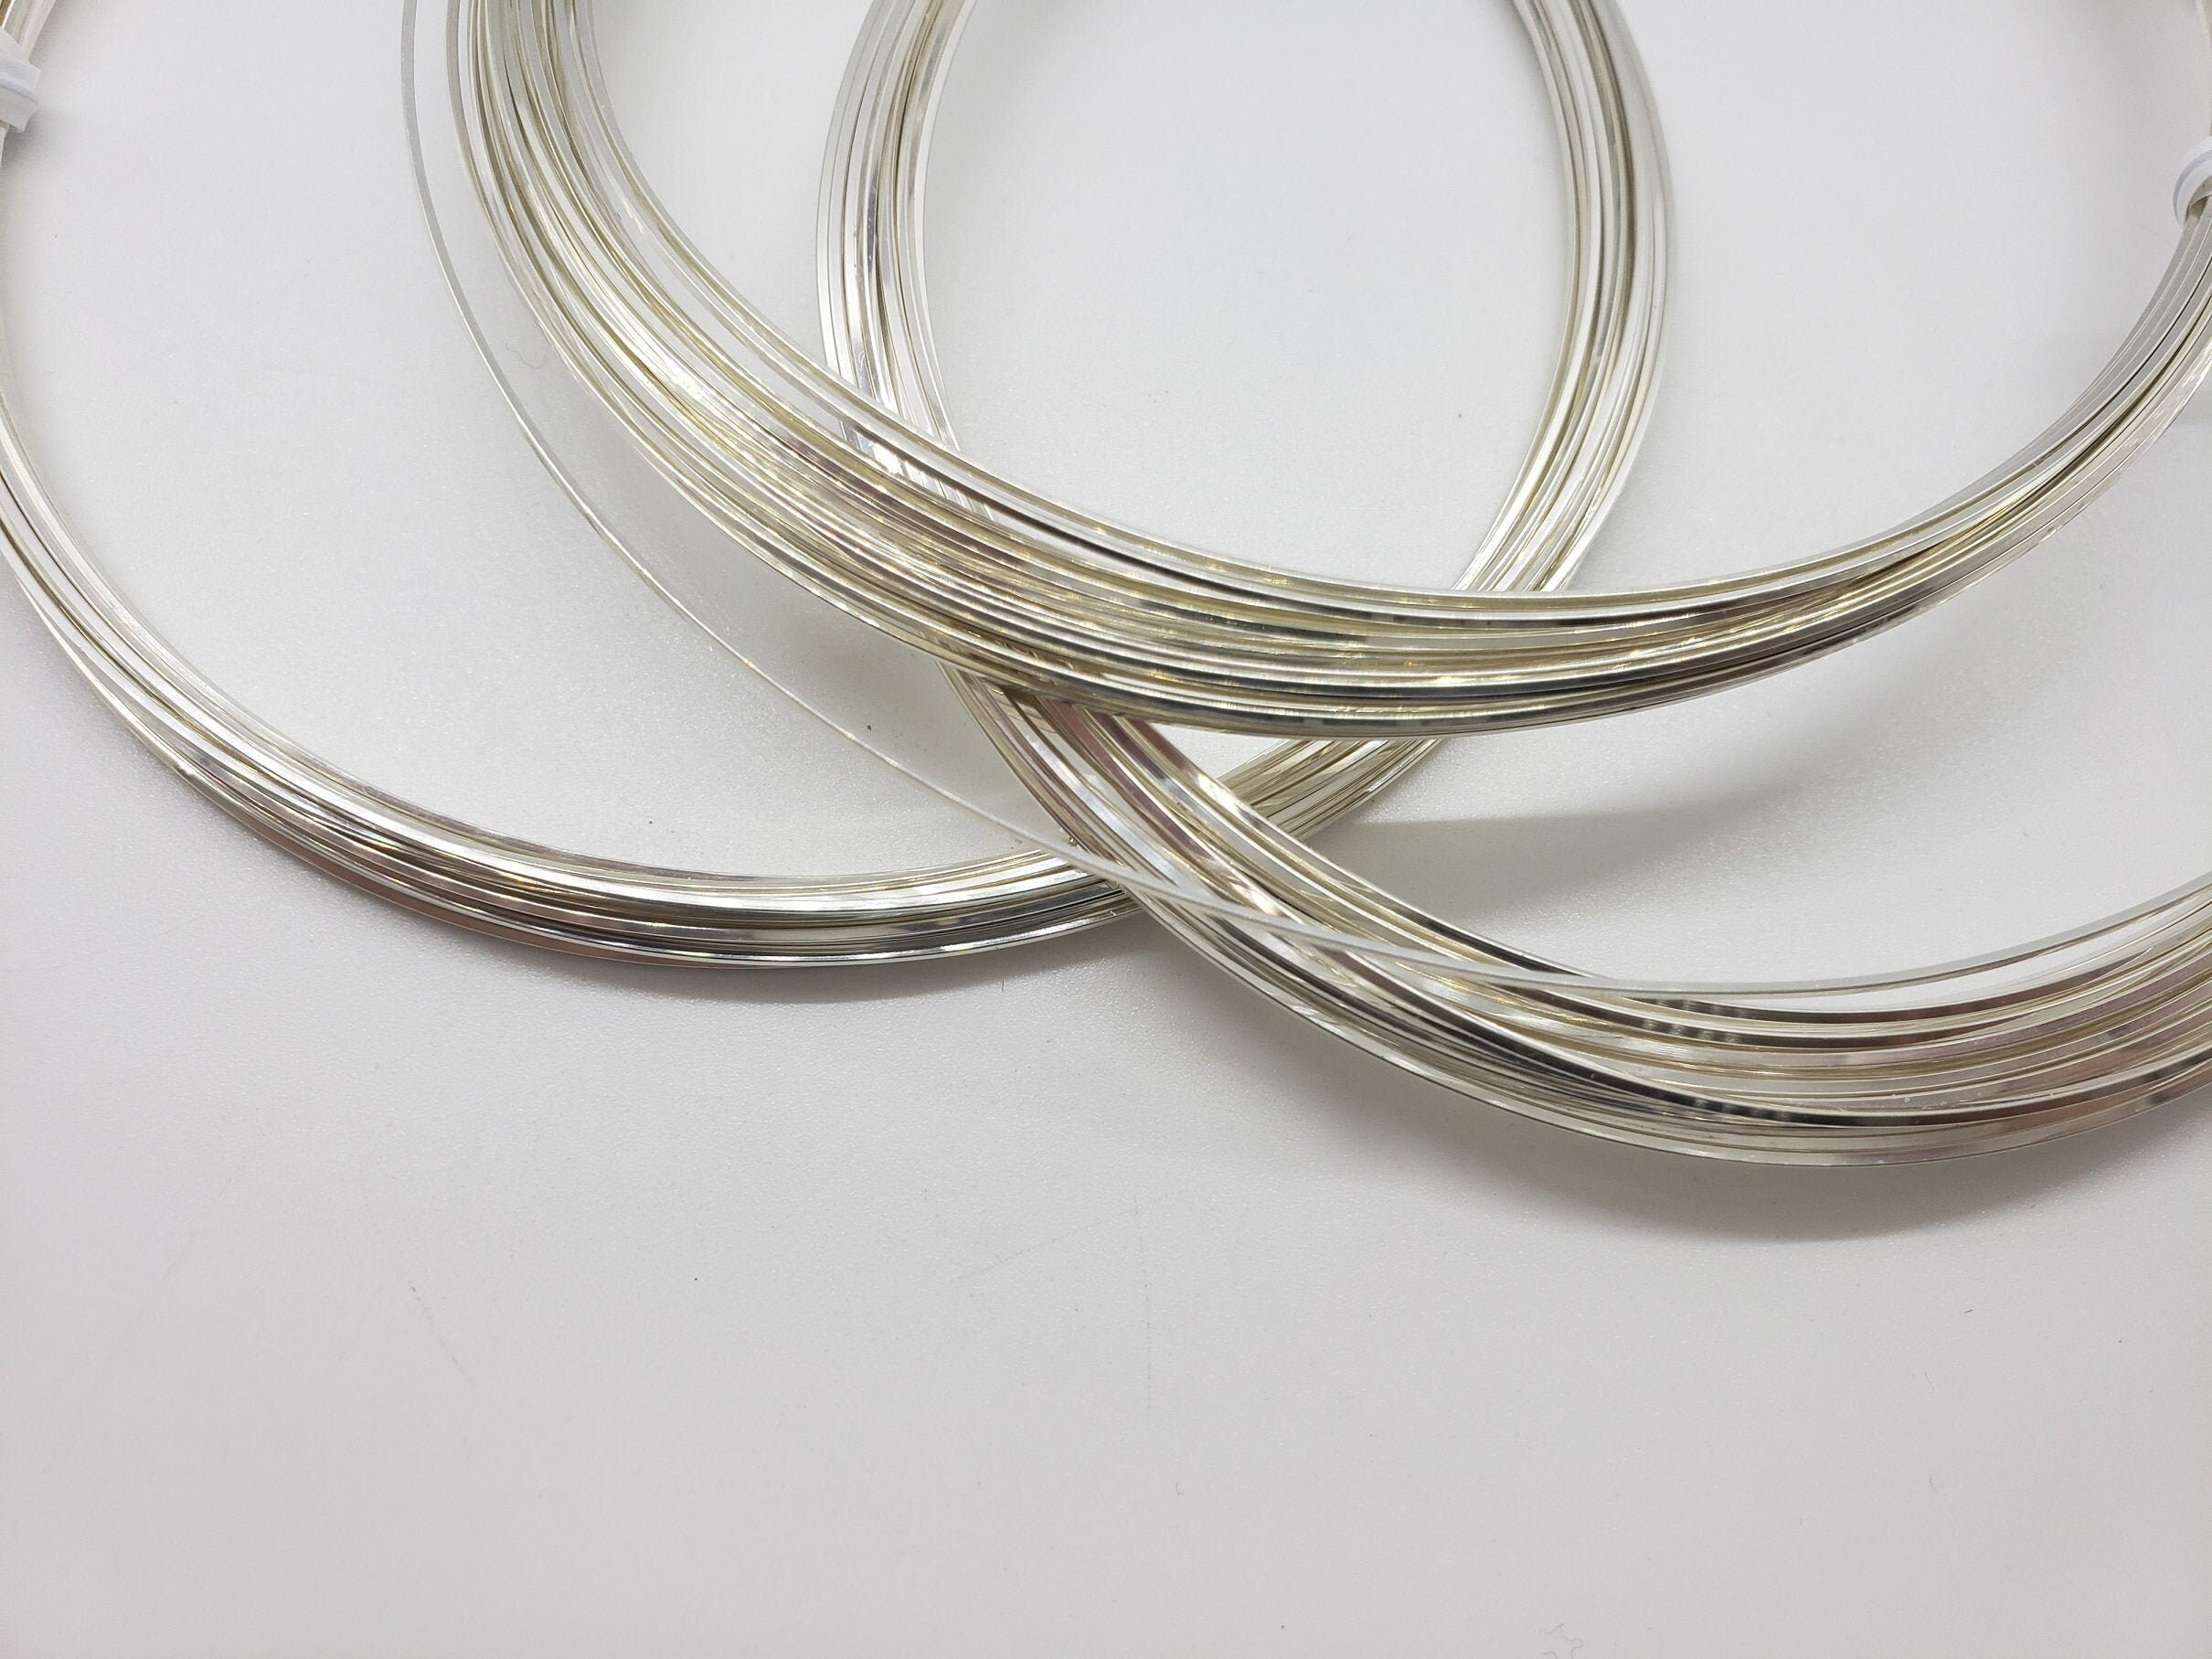 Copper Wire, Silver Plated Parawire 24ga Champagne Gold 100' Roll